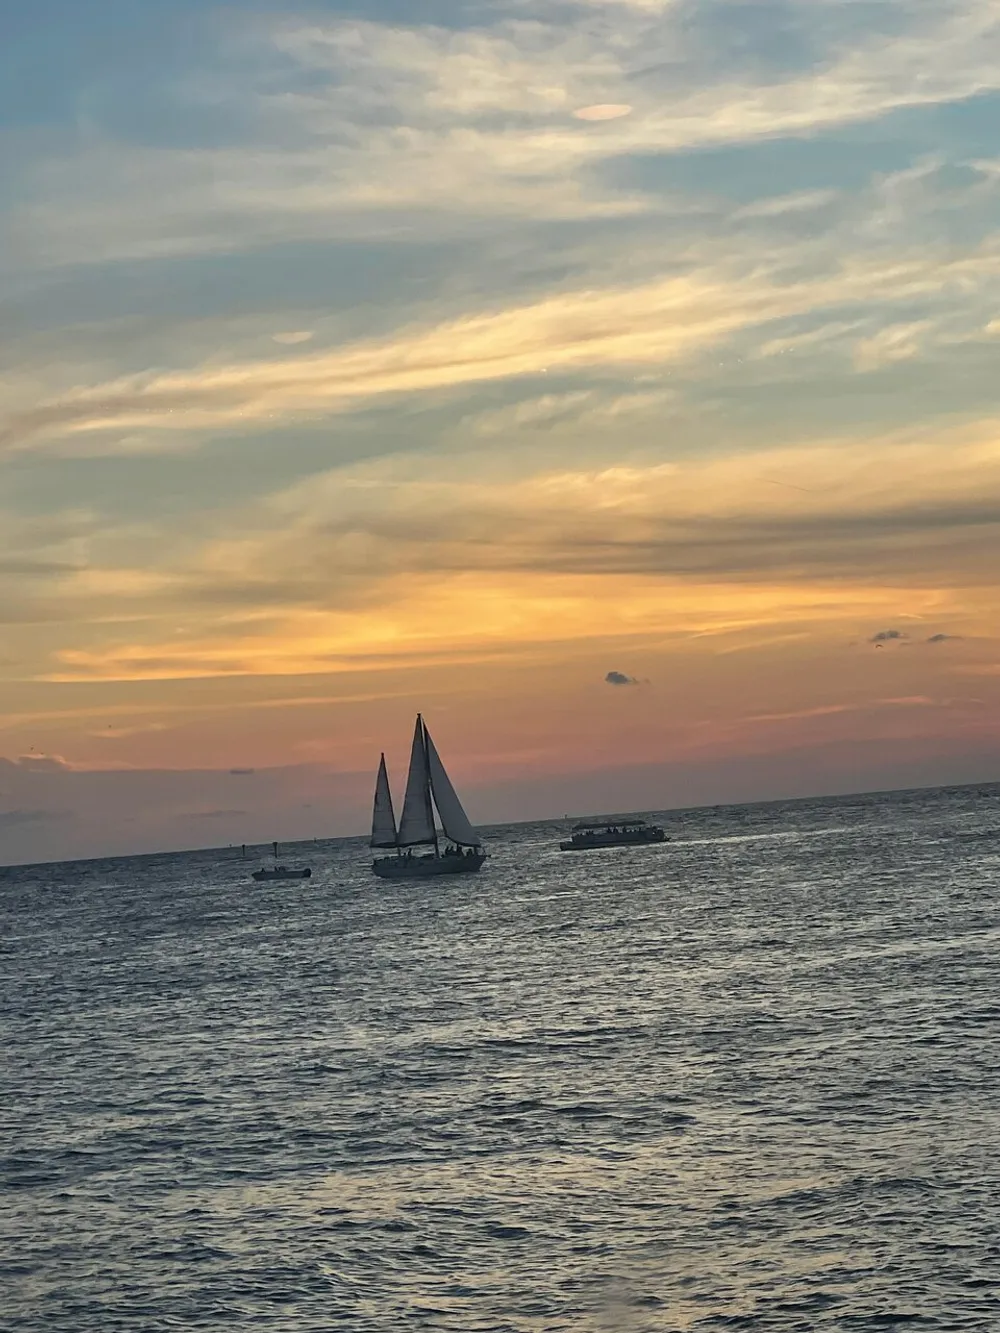 The image shows a sailboat on the ocean at sunset with colorful skies and scattered clouds above